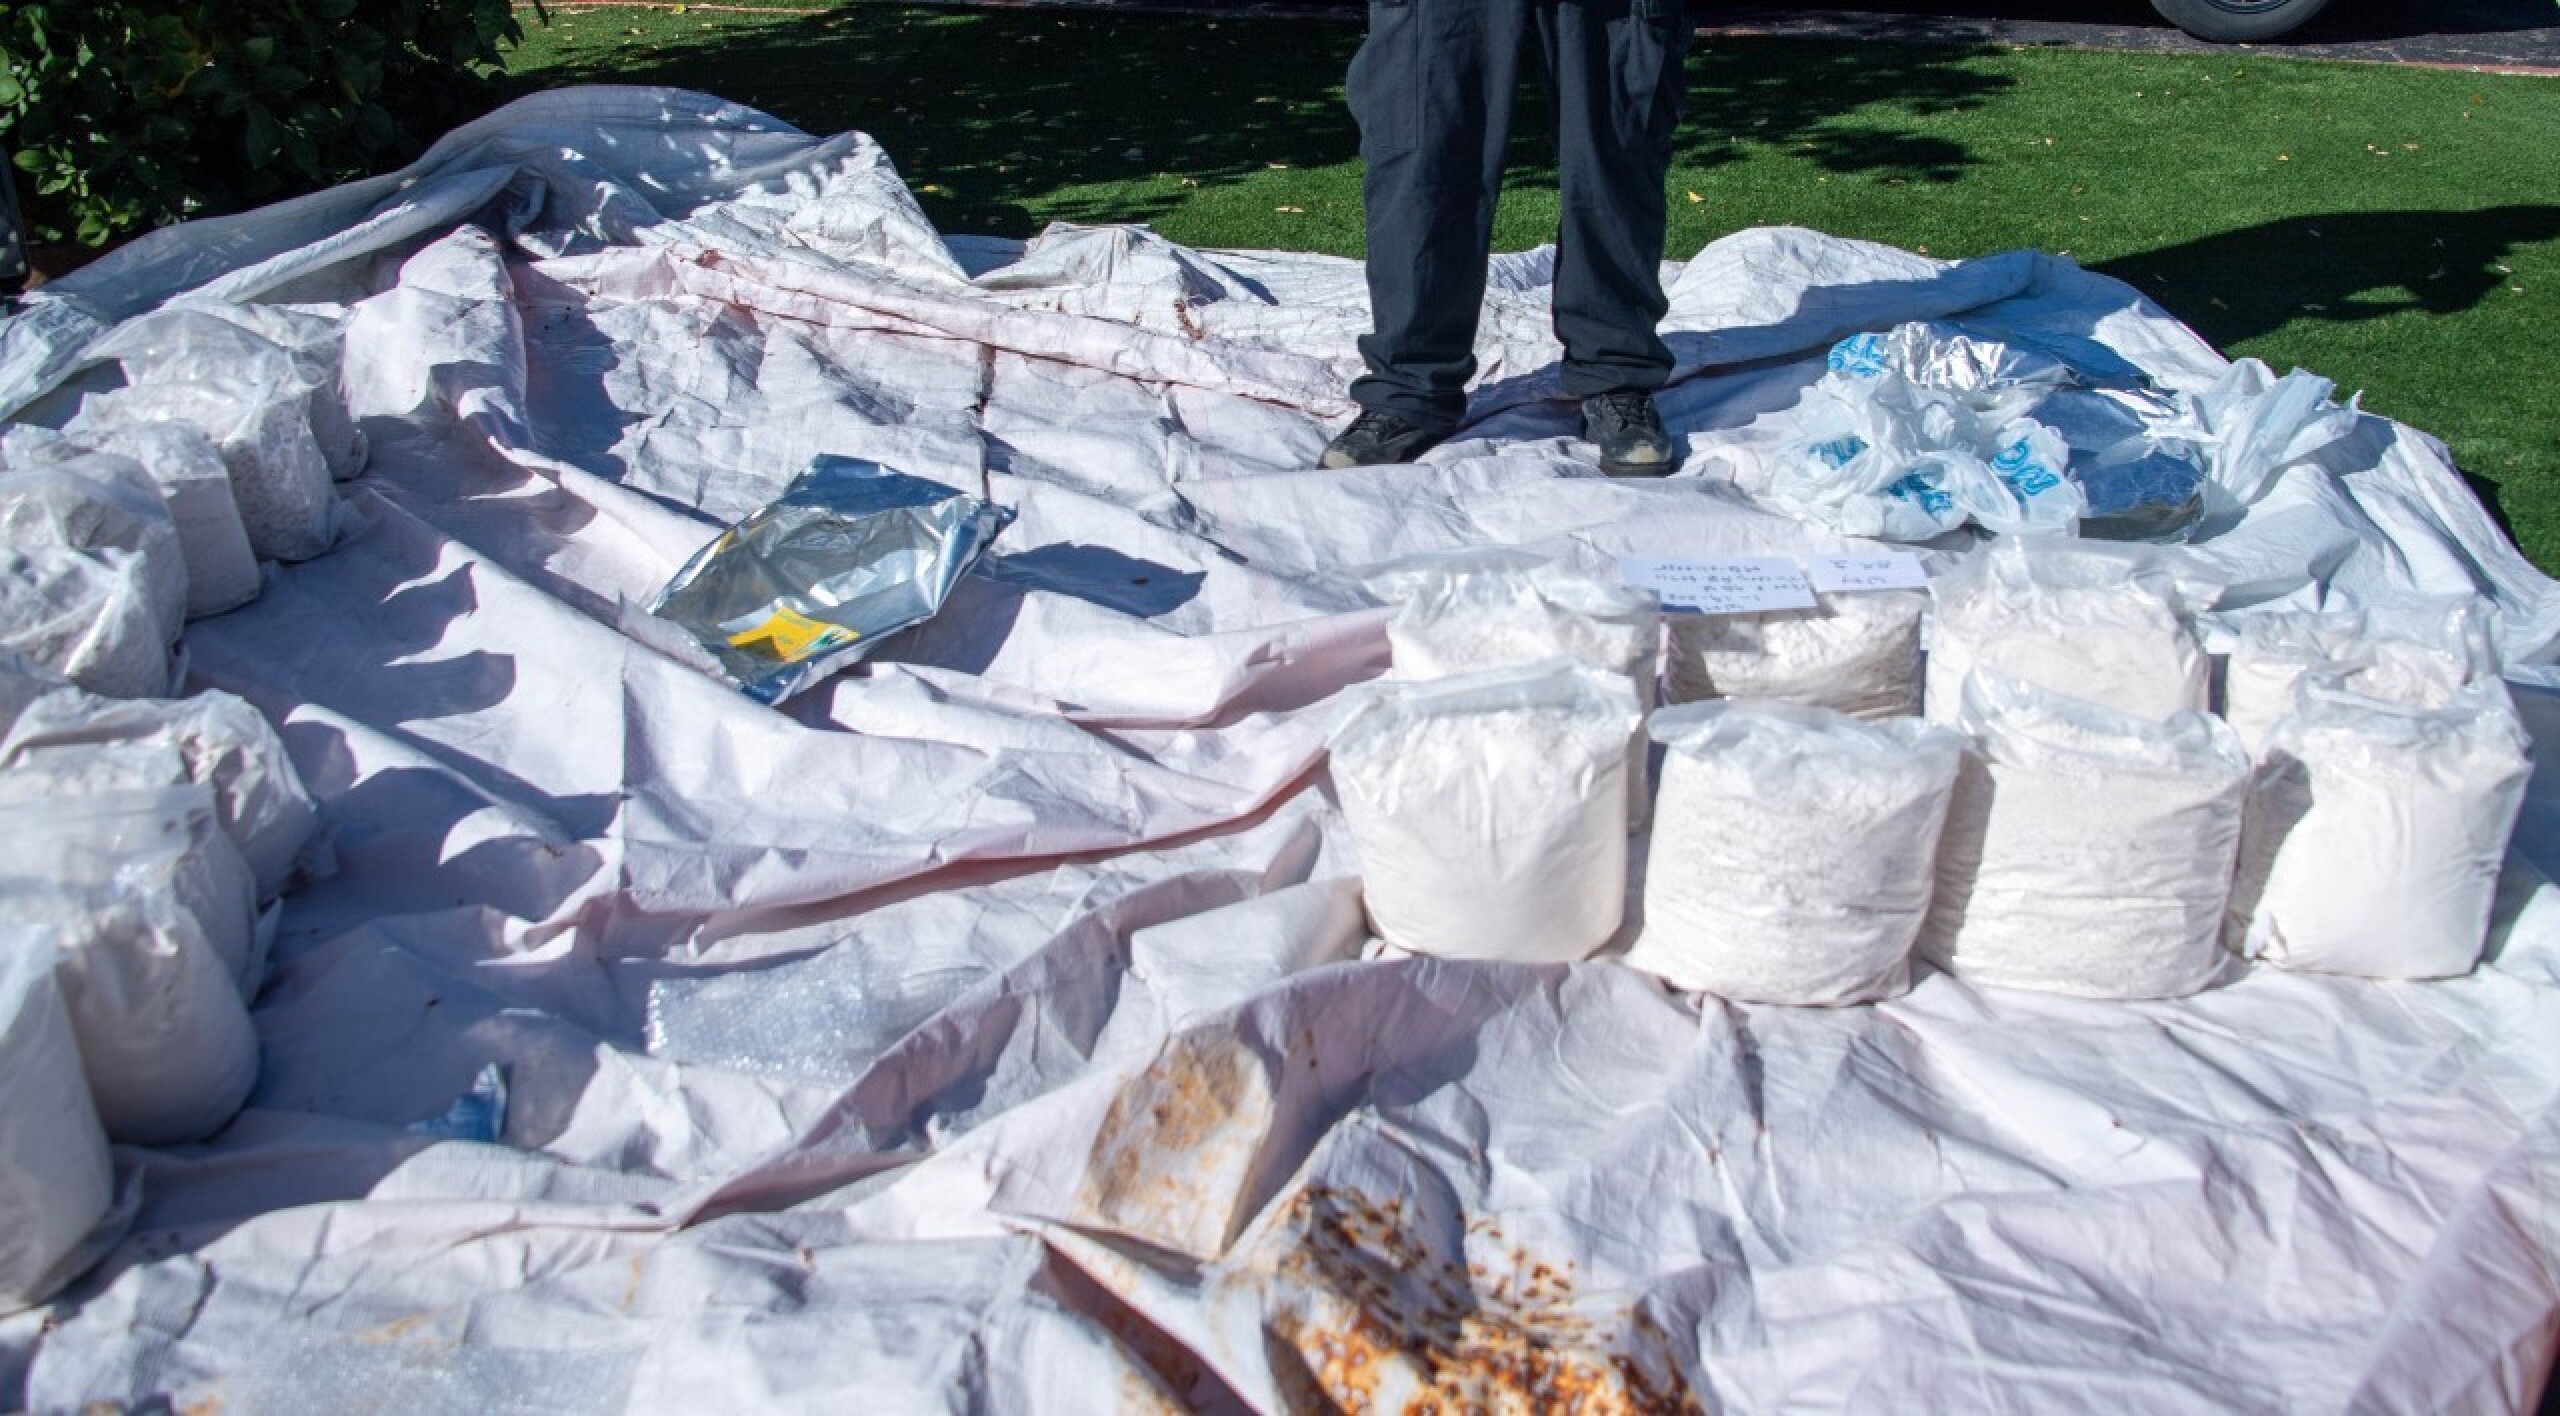 An outdoor picture of clear bags with a white substance in them strewn over a white sheet. someone's show clad feet are visible in the background